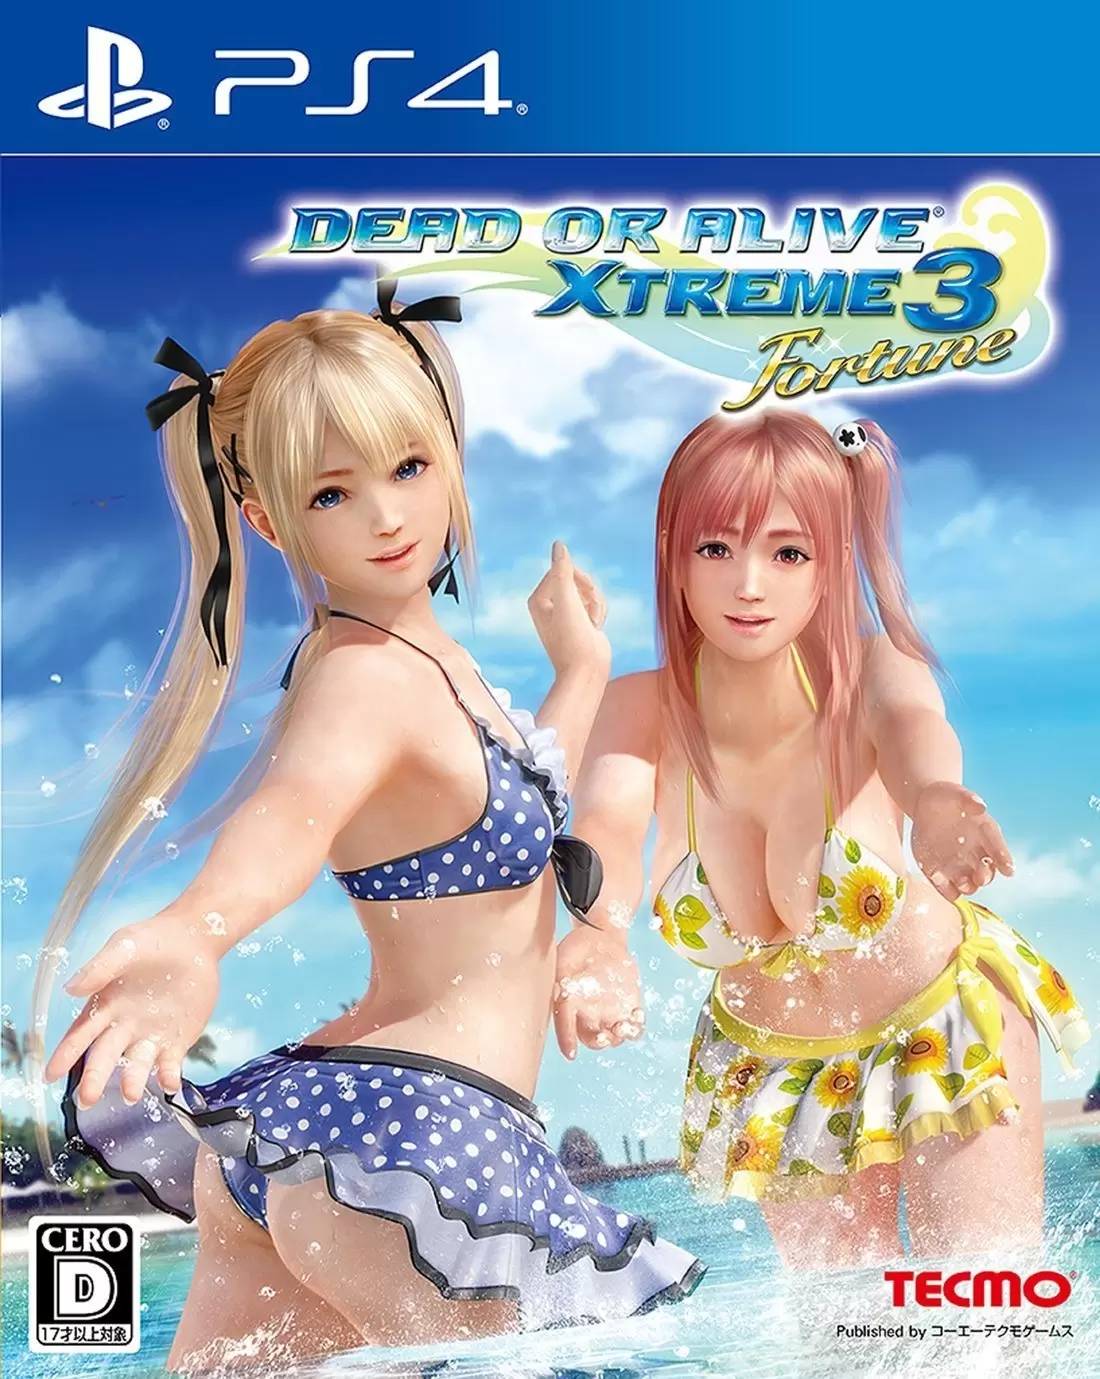 PS4 Games - Dead or Alive Xtreme 3 Fortune